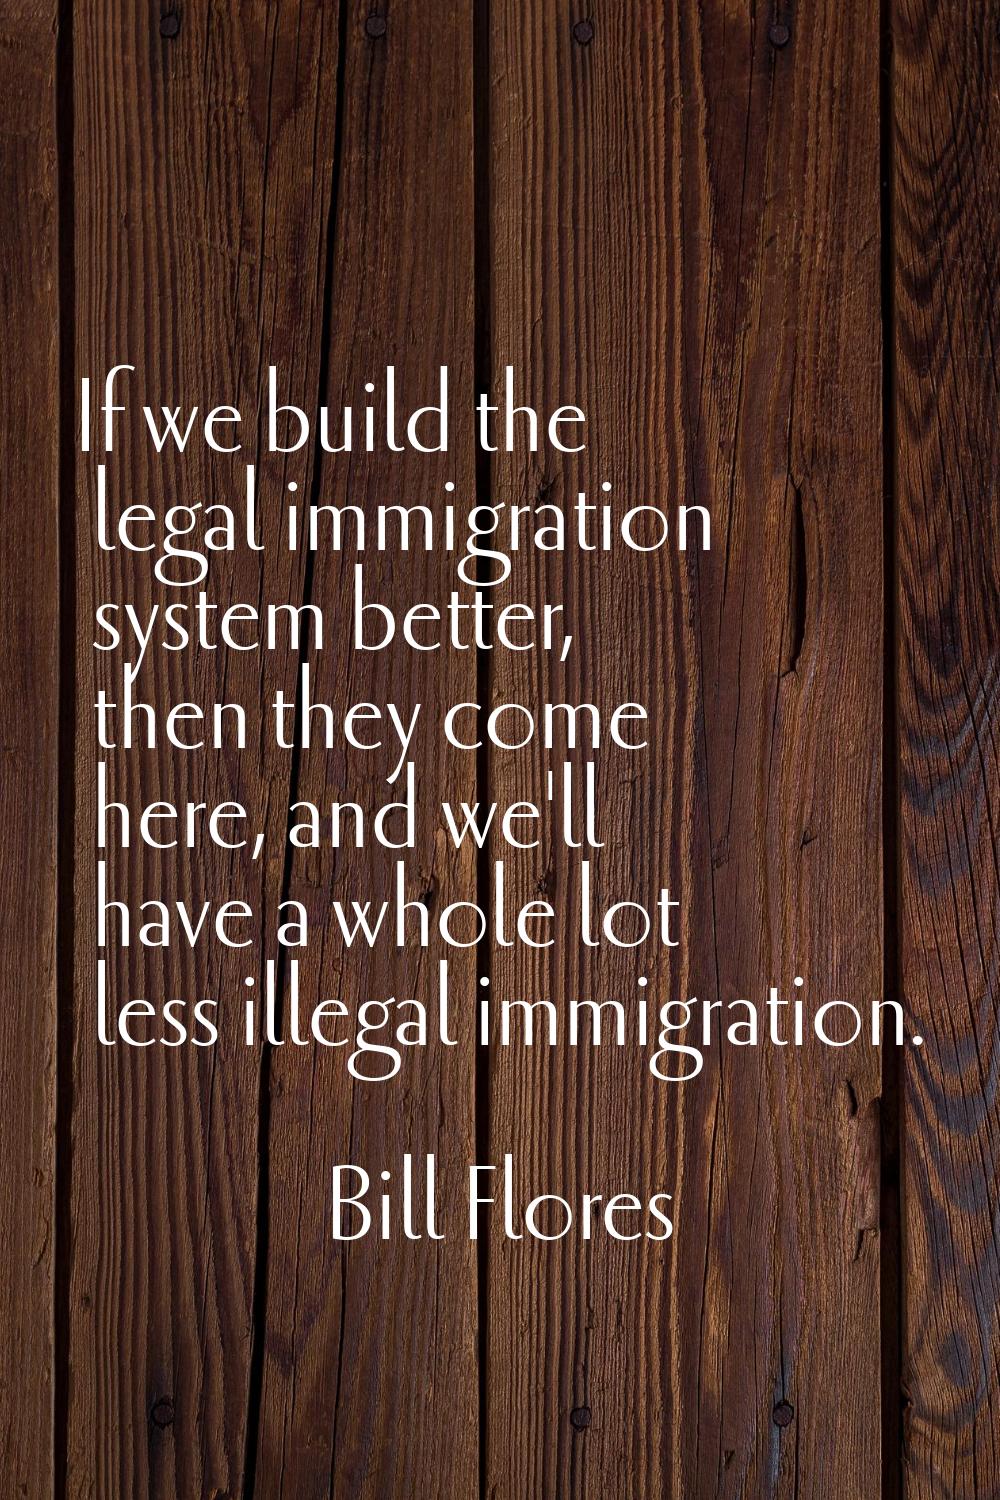 If we build the legal immigration system better, then they come here, and we'll have a whole lot le